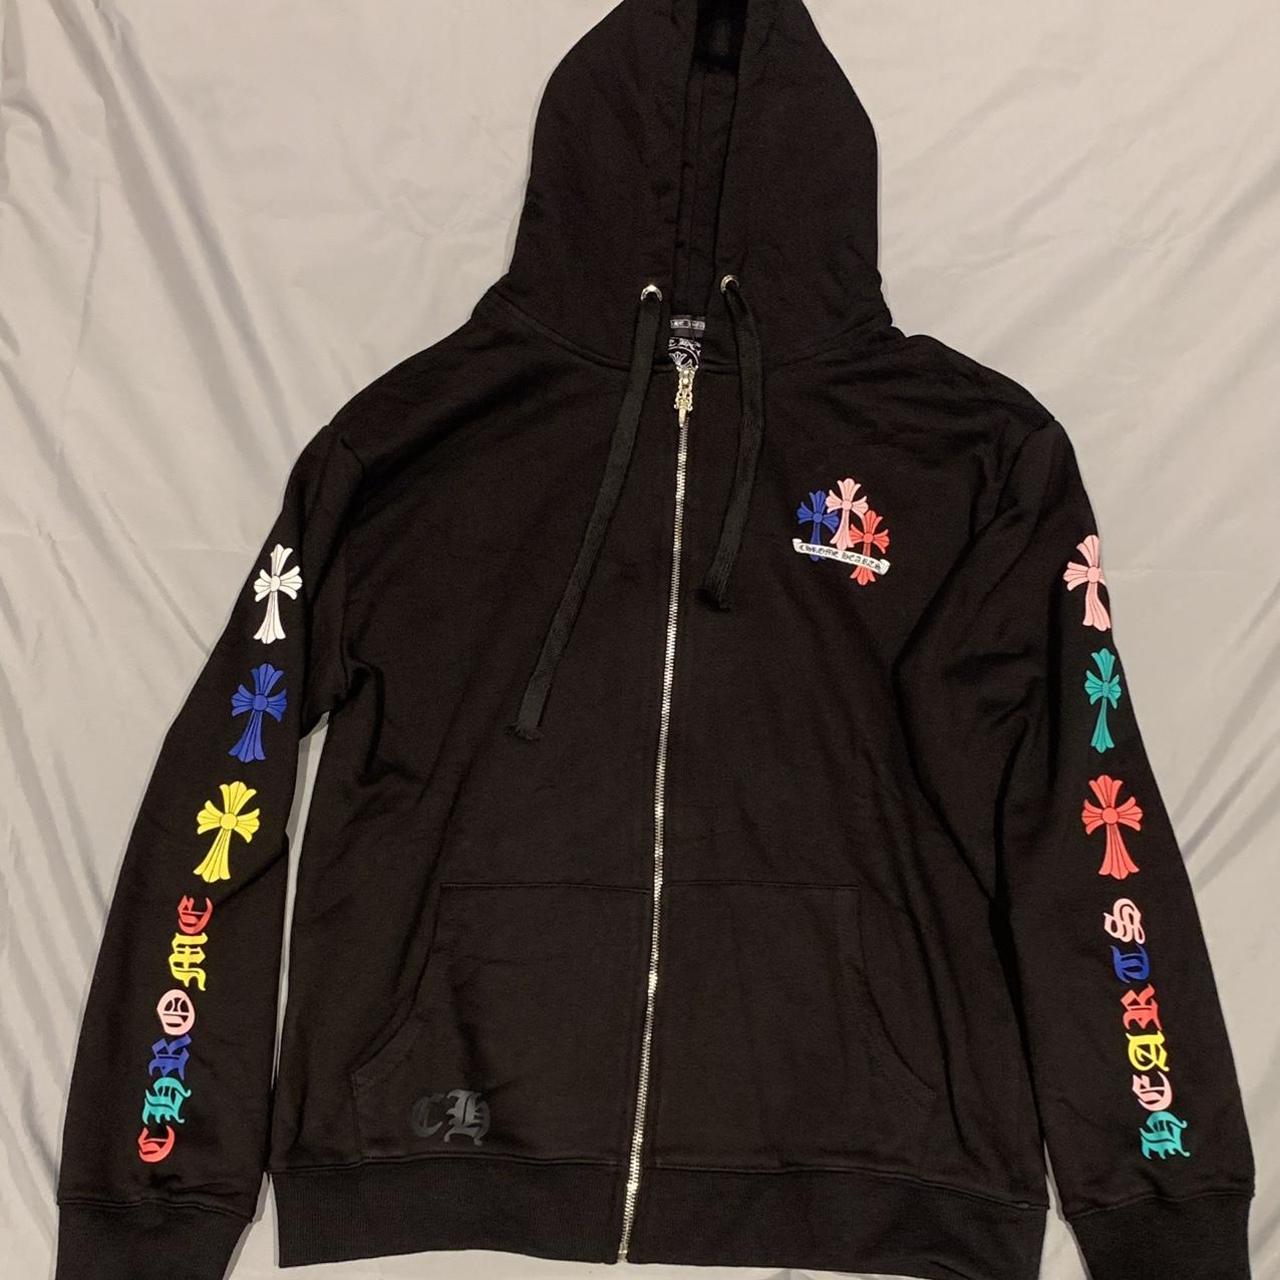 Chrome Hearts Multi Color Cross Cemetery Zip Up Hoodie, 47% OFF